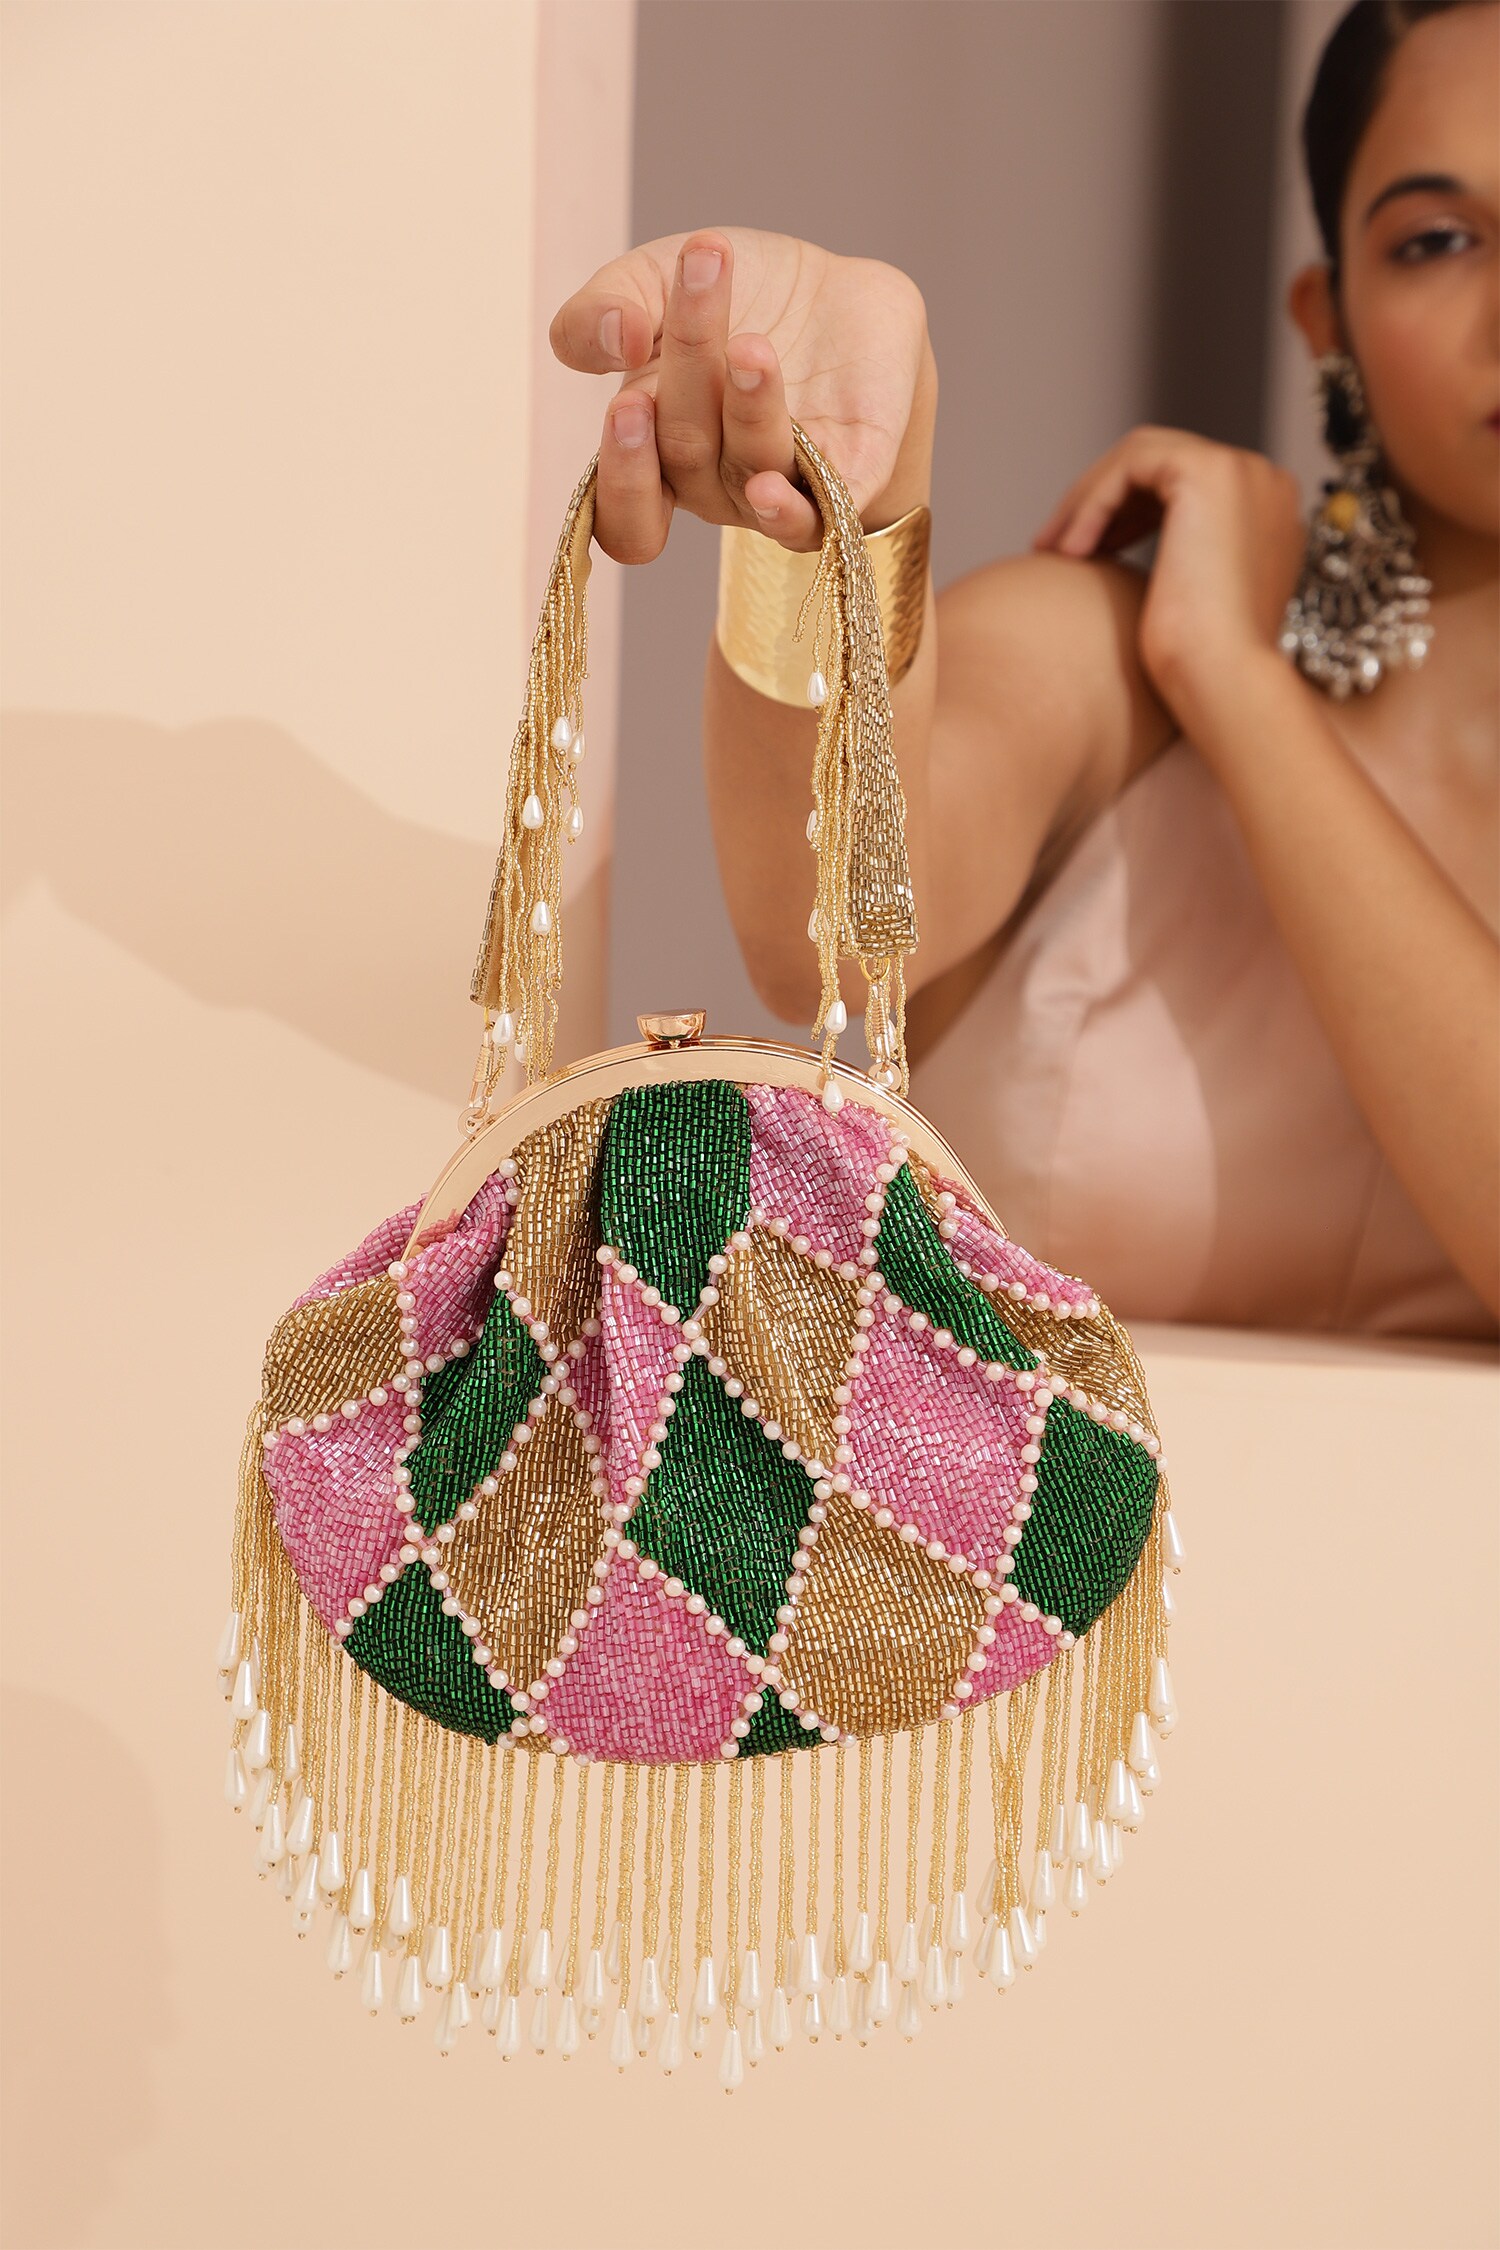 Beaded Clutch  Handcrafted Beaded Clutches - The Tan Clan